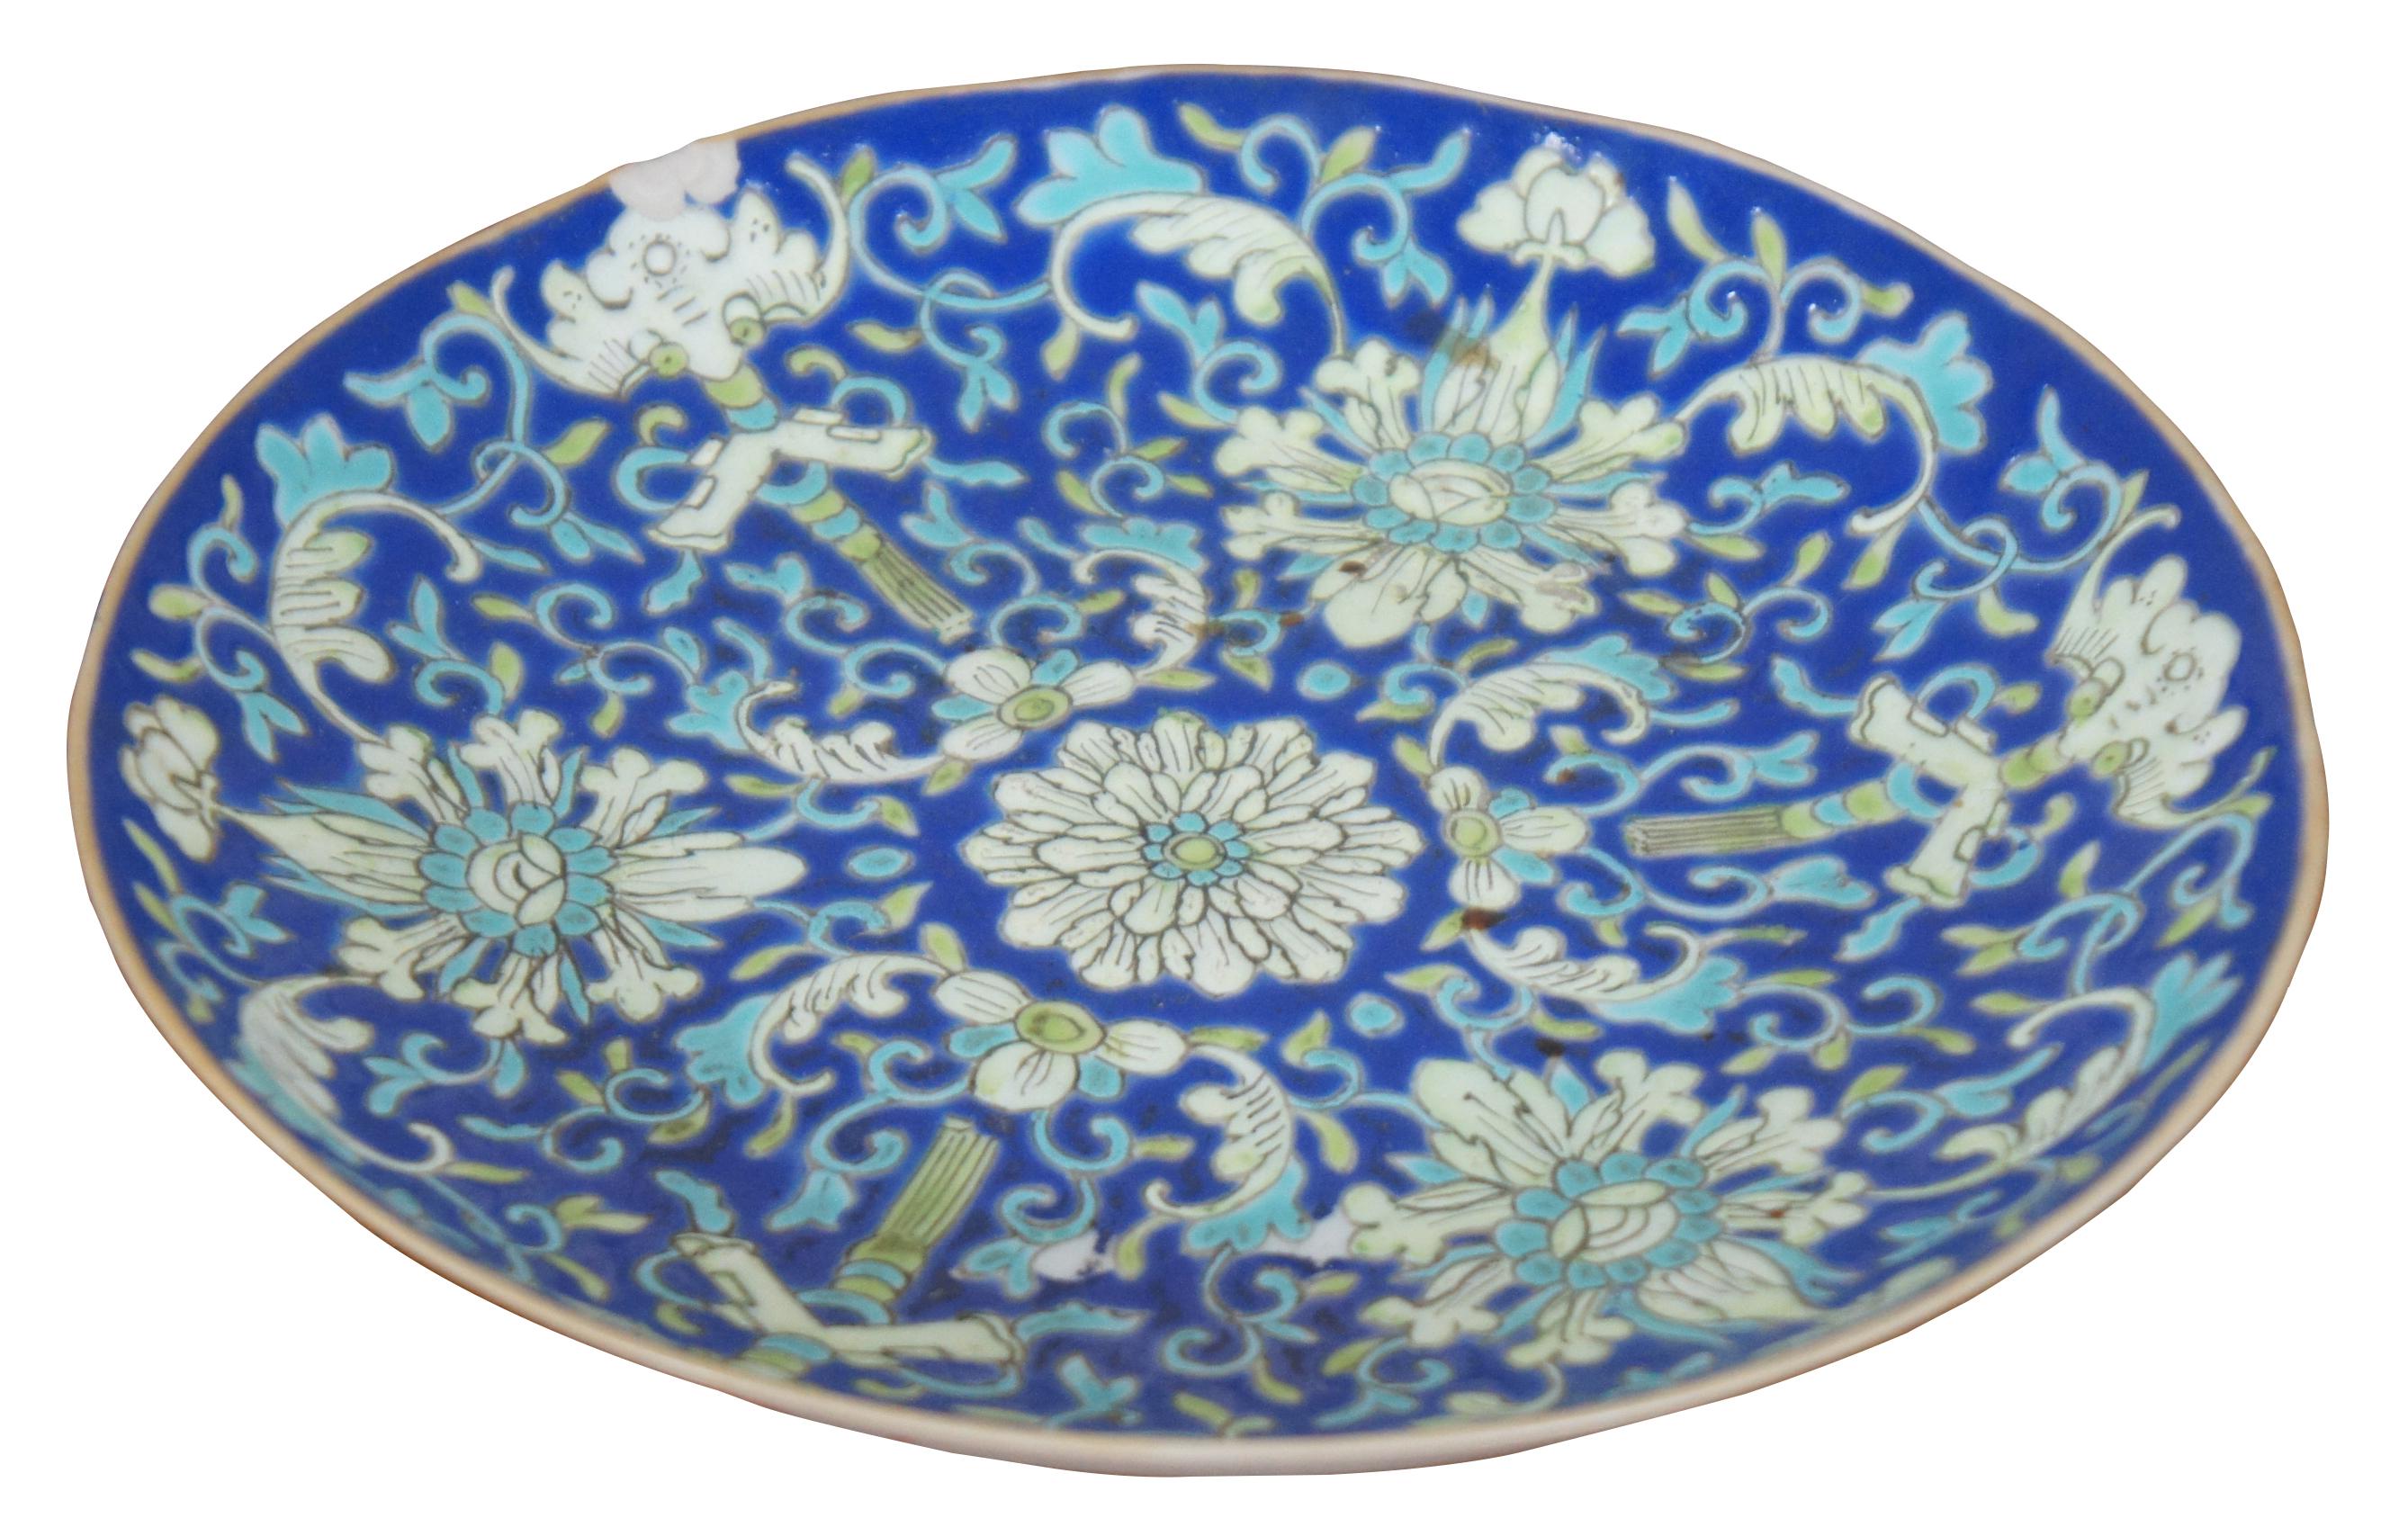 Antique Qing Dynasty porcelain cloisonne enameled lotus scroll plate, dish or shallow bowl featuring a field of blue with white lotus flowers, green bamboo, and orange bats under the edge. Measure: 7